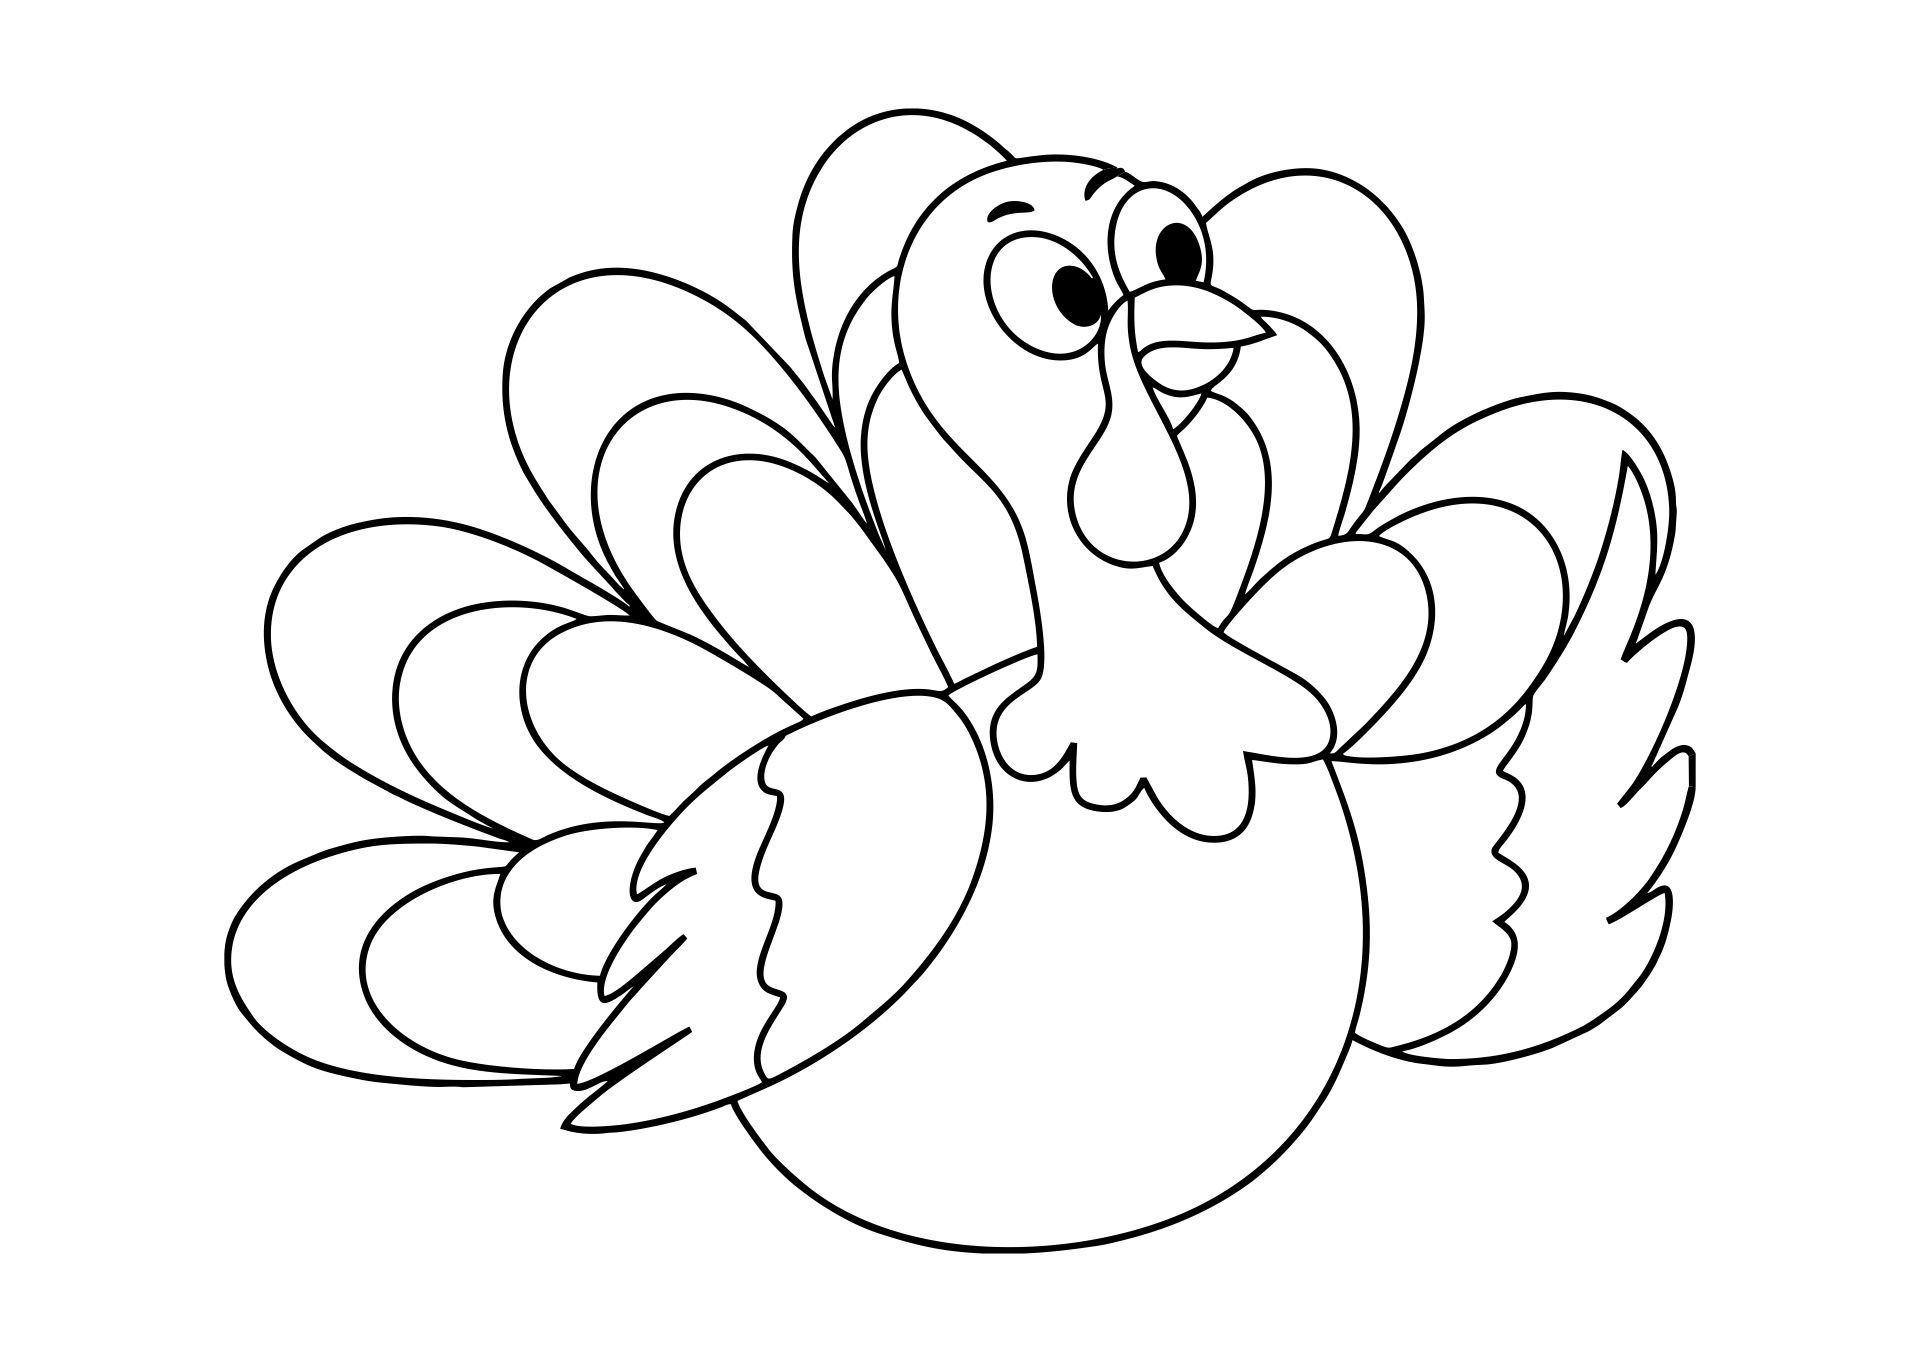 Easy Printable Thanksgiving Coloring Pages